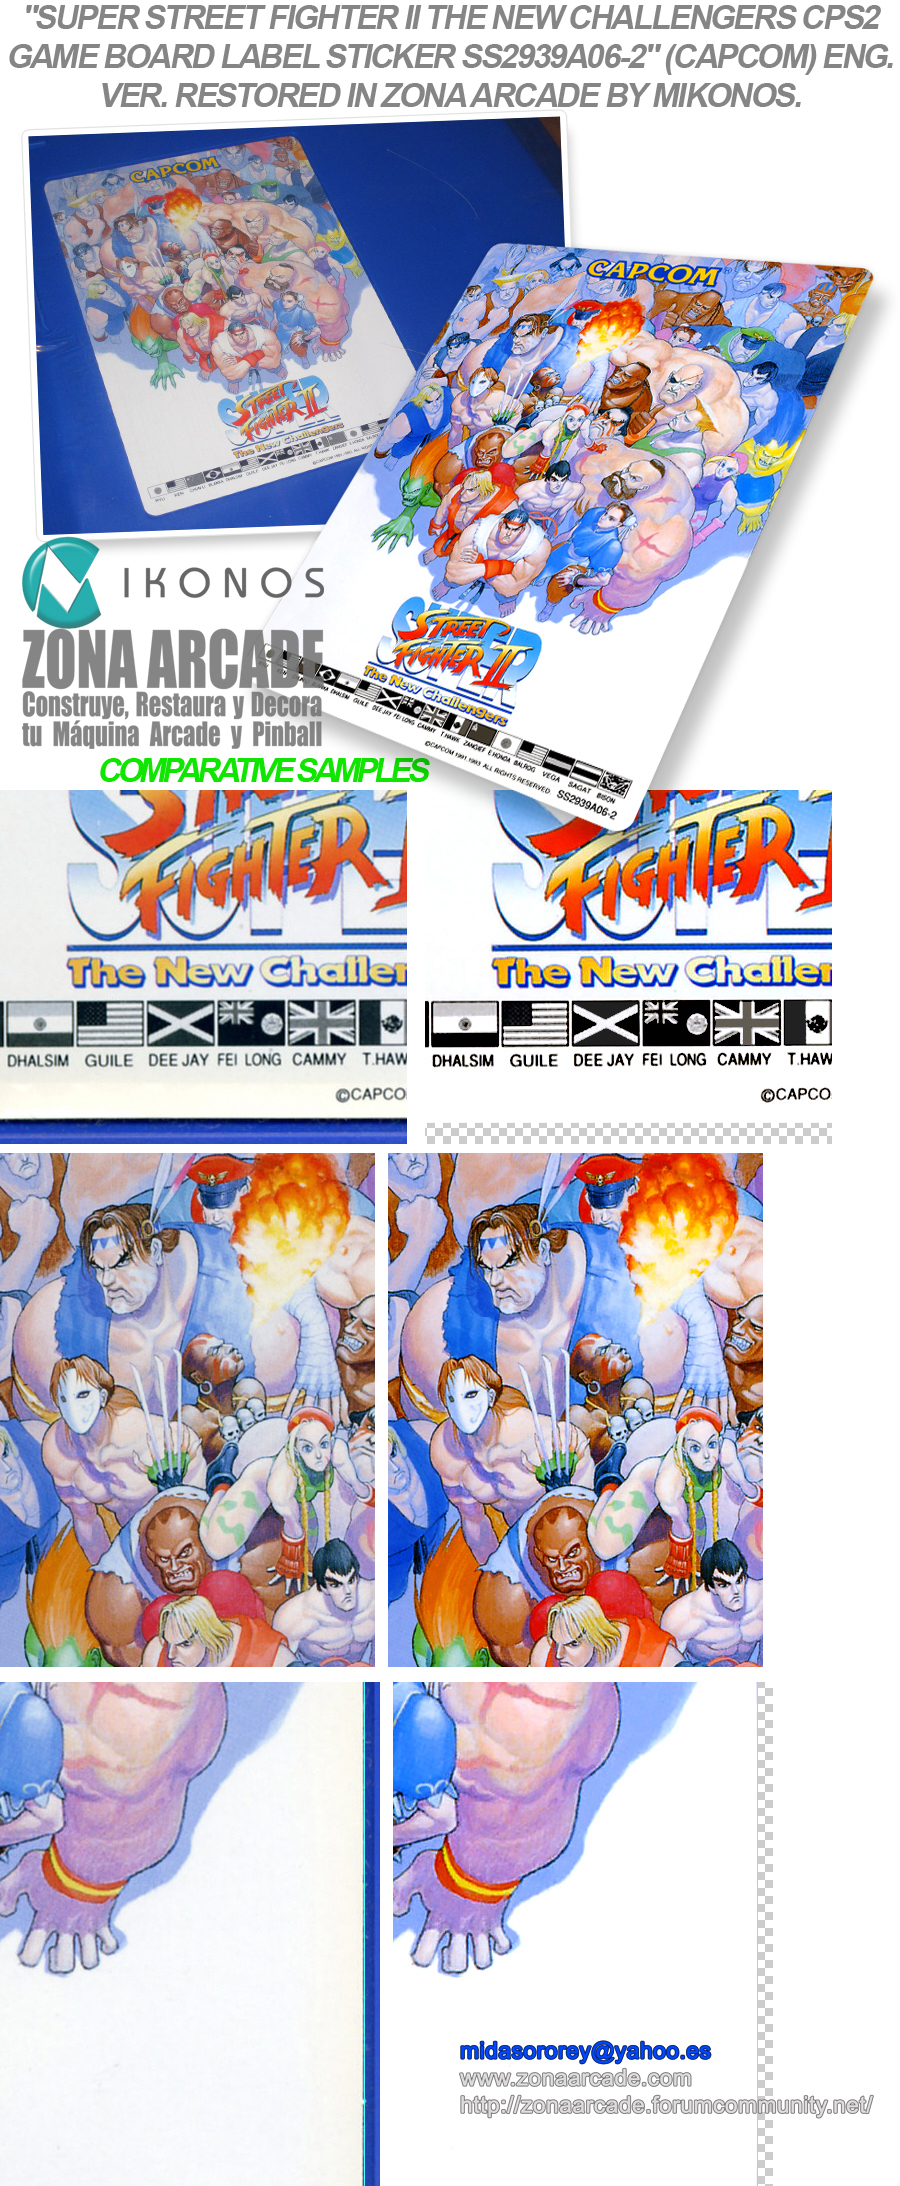 Fighter-II-The-New-Challengers-CPS2-Game-Board-Label-Sticker-SS2939A06-2-Restored-Mikonos1